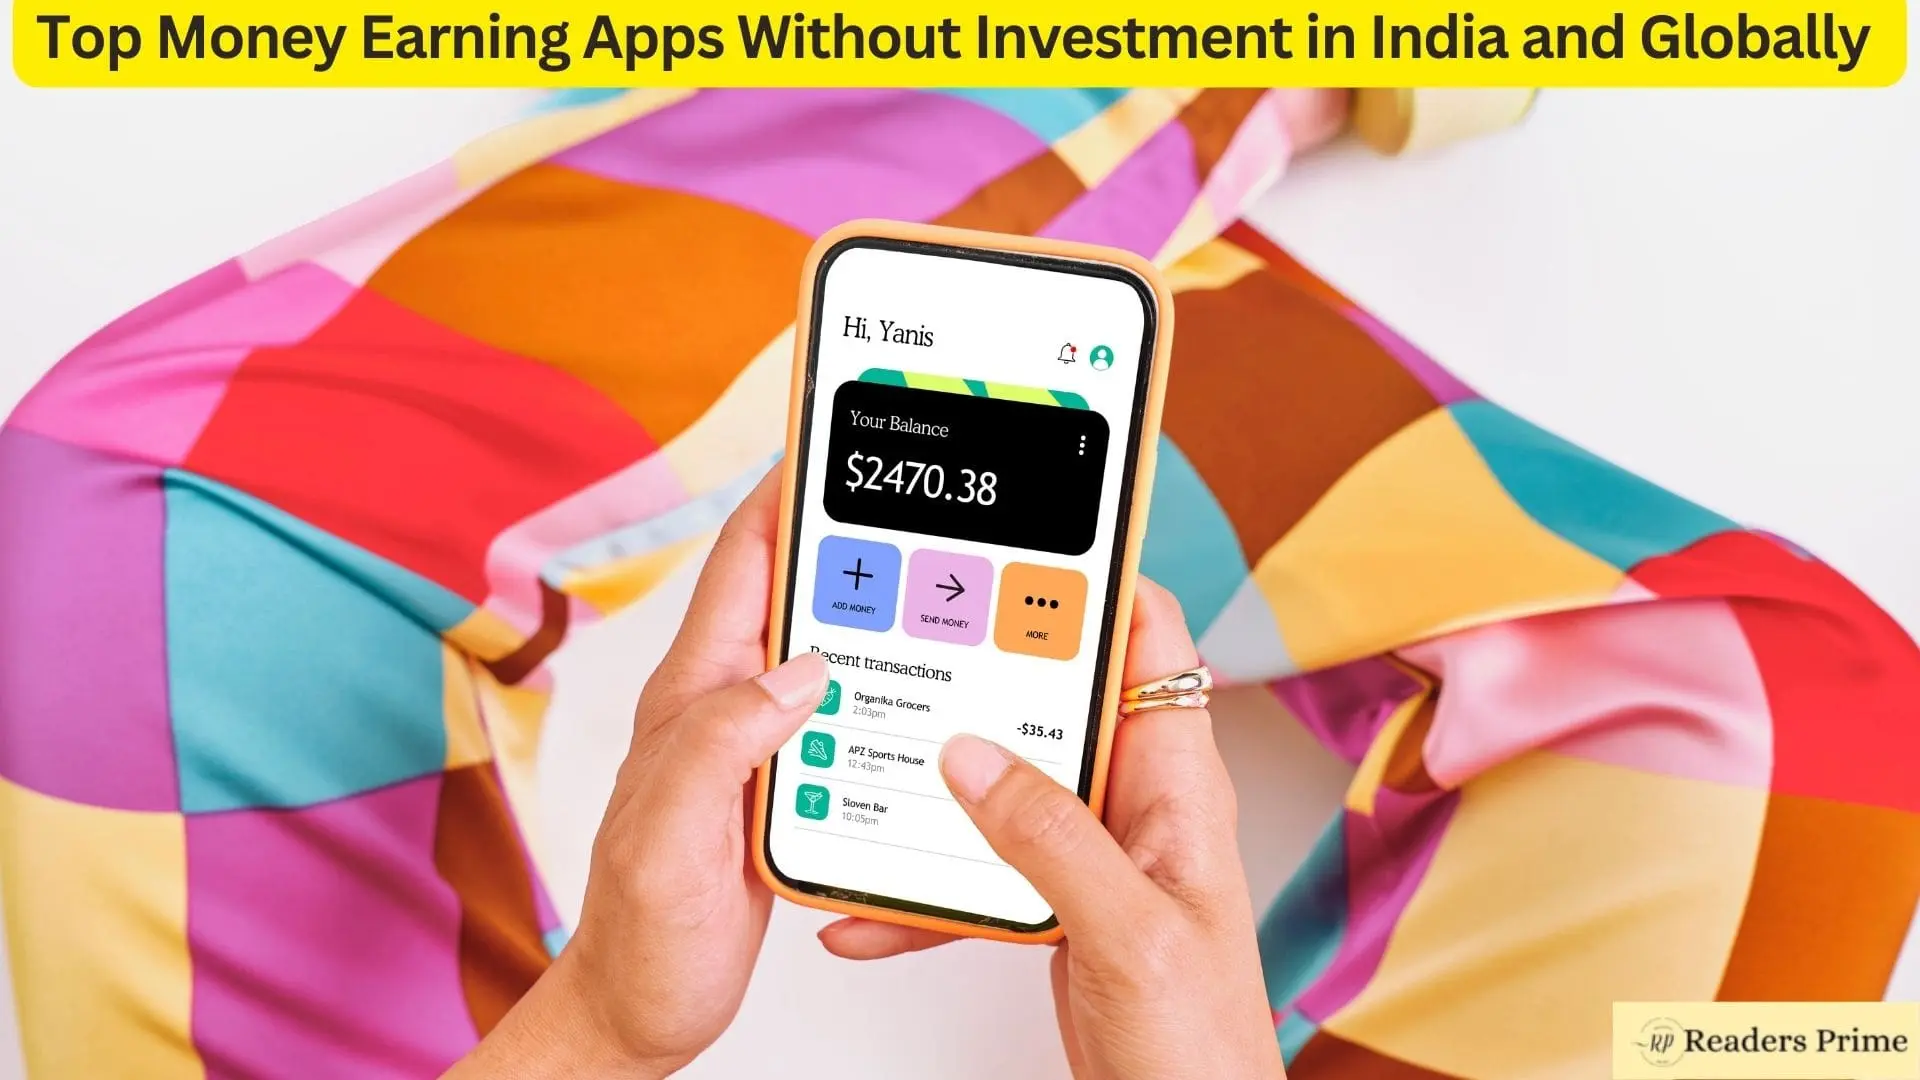 Top-Money-Earning-Apps-Without-Investment-in-India-and-Globally-min